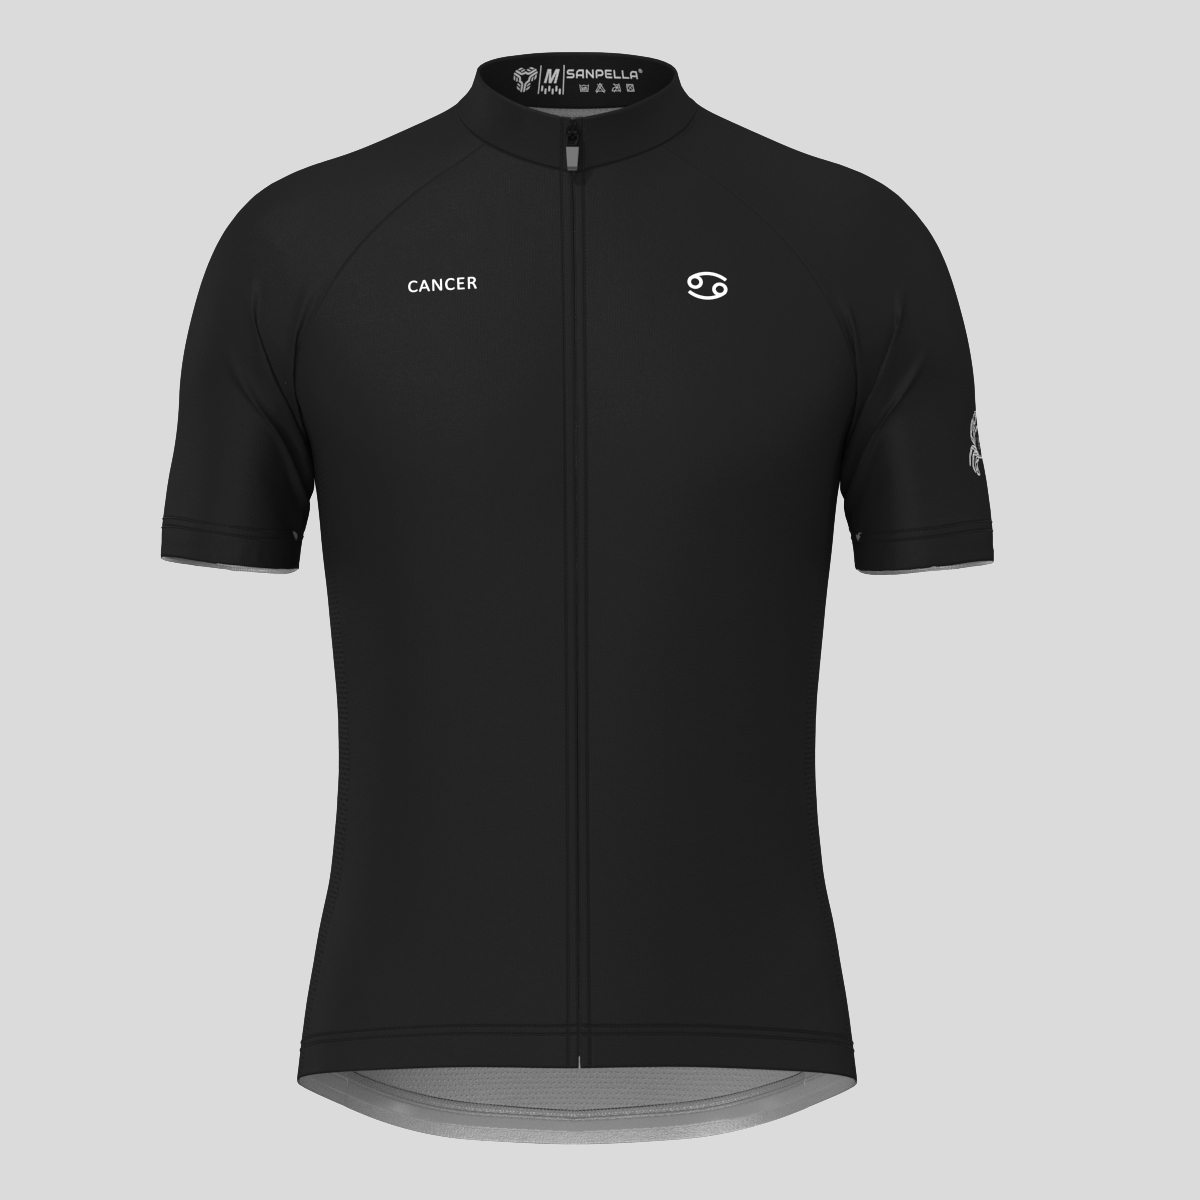 Cancer Cycling Jersey - Men